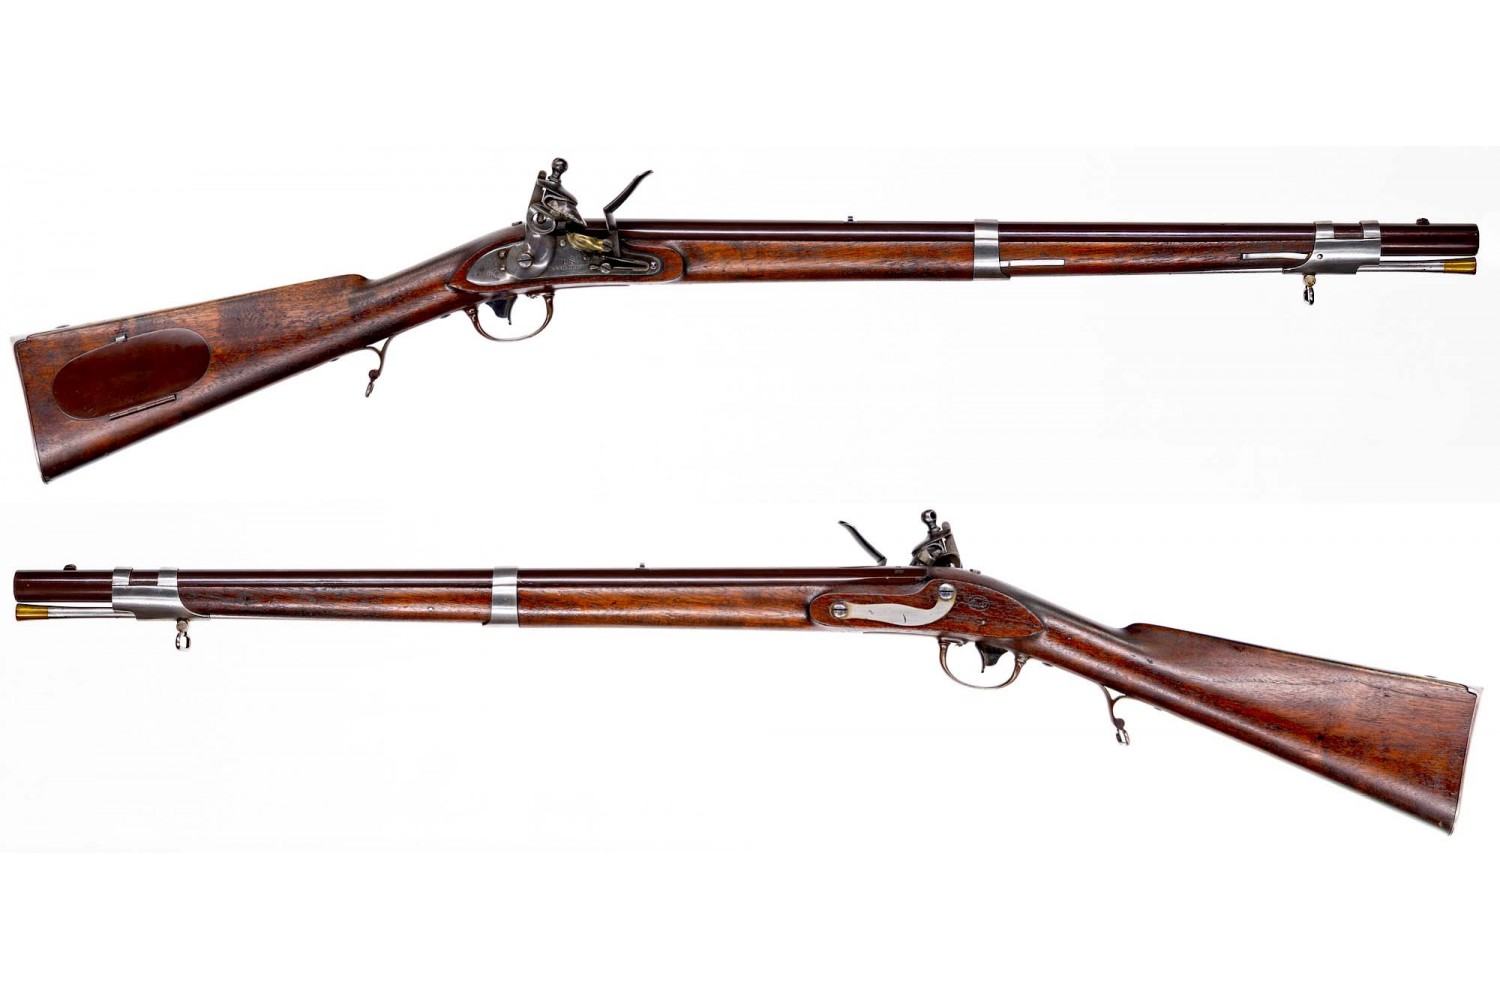 Outstanding Condition US Model 1817 Common Rifle - Likely An ...